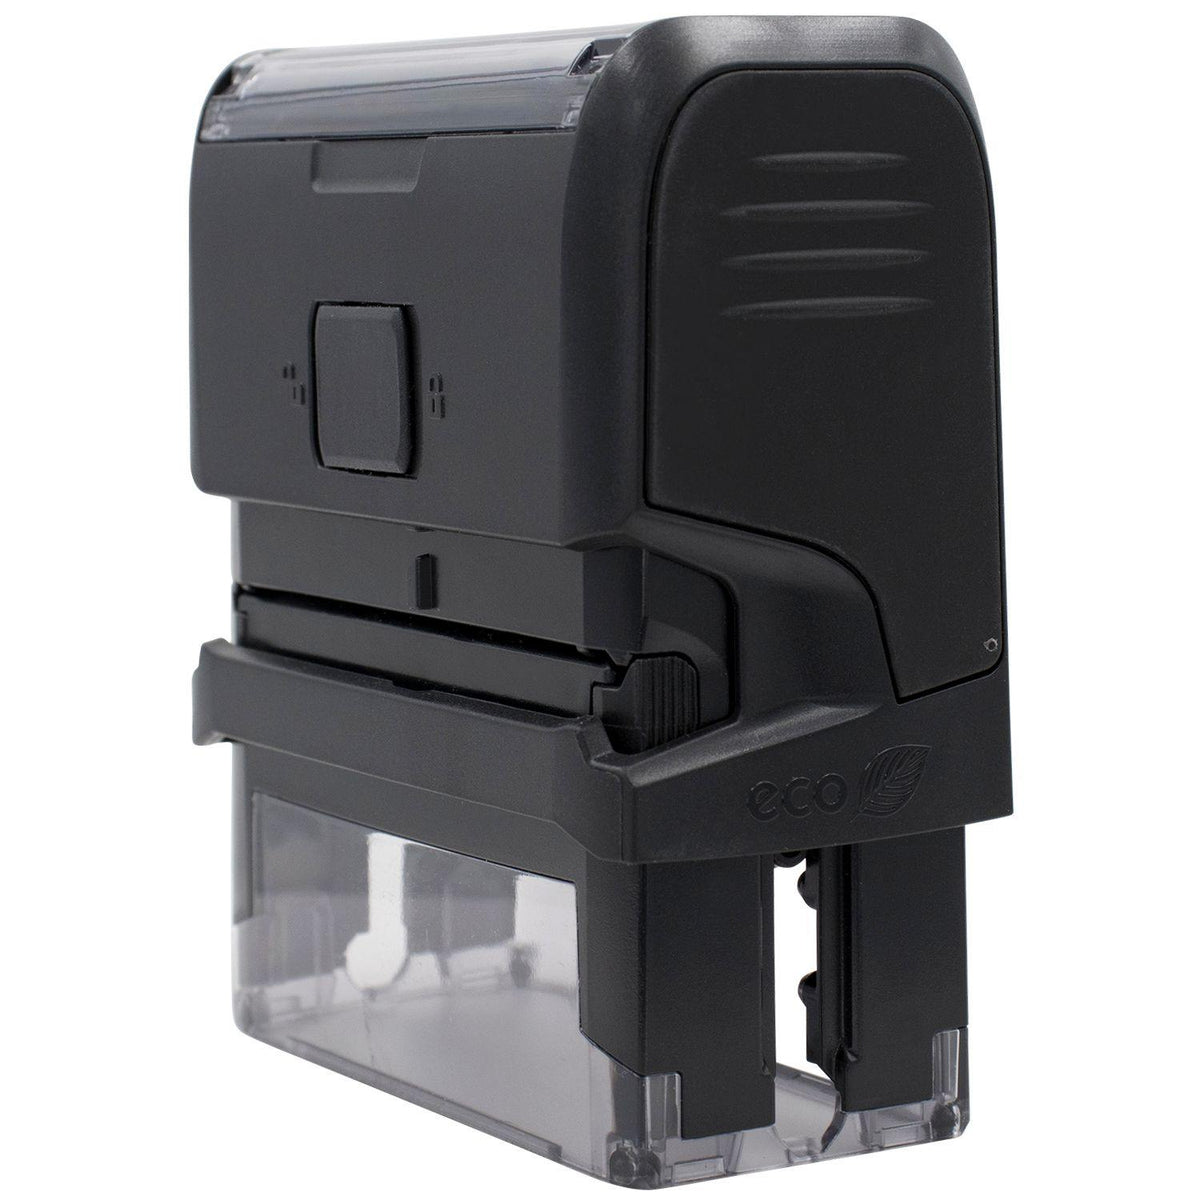 Large Self Inking Past Due Stamp - Engineer Seal Stamps - Brand_Trodat, Impression Size_Large, Stamp Type_Self-Inking Stamp, Type of Use_Teacher